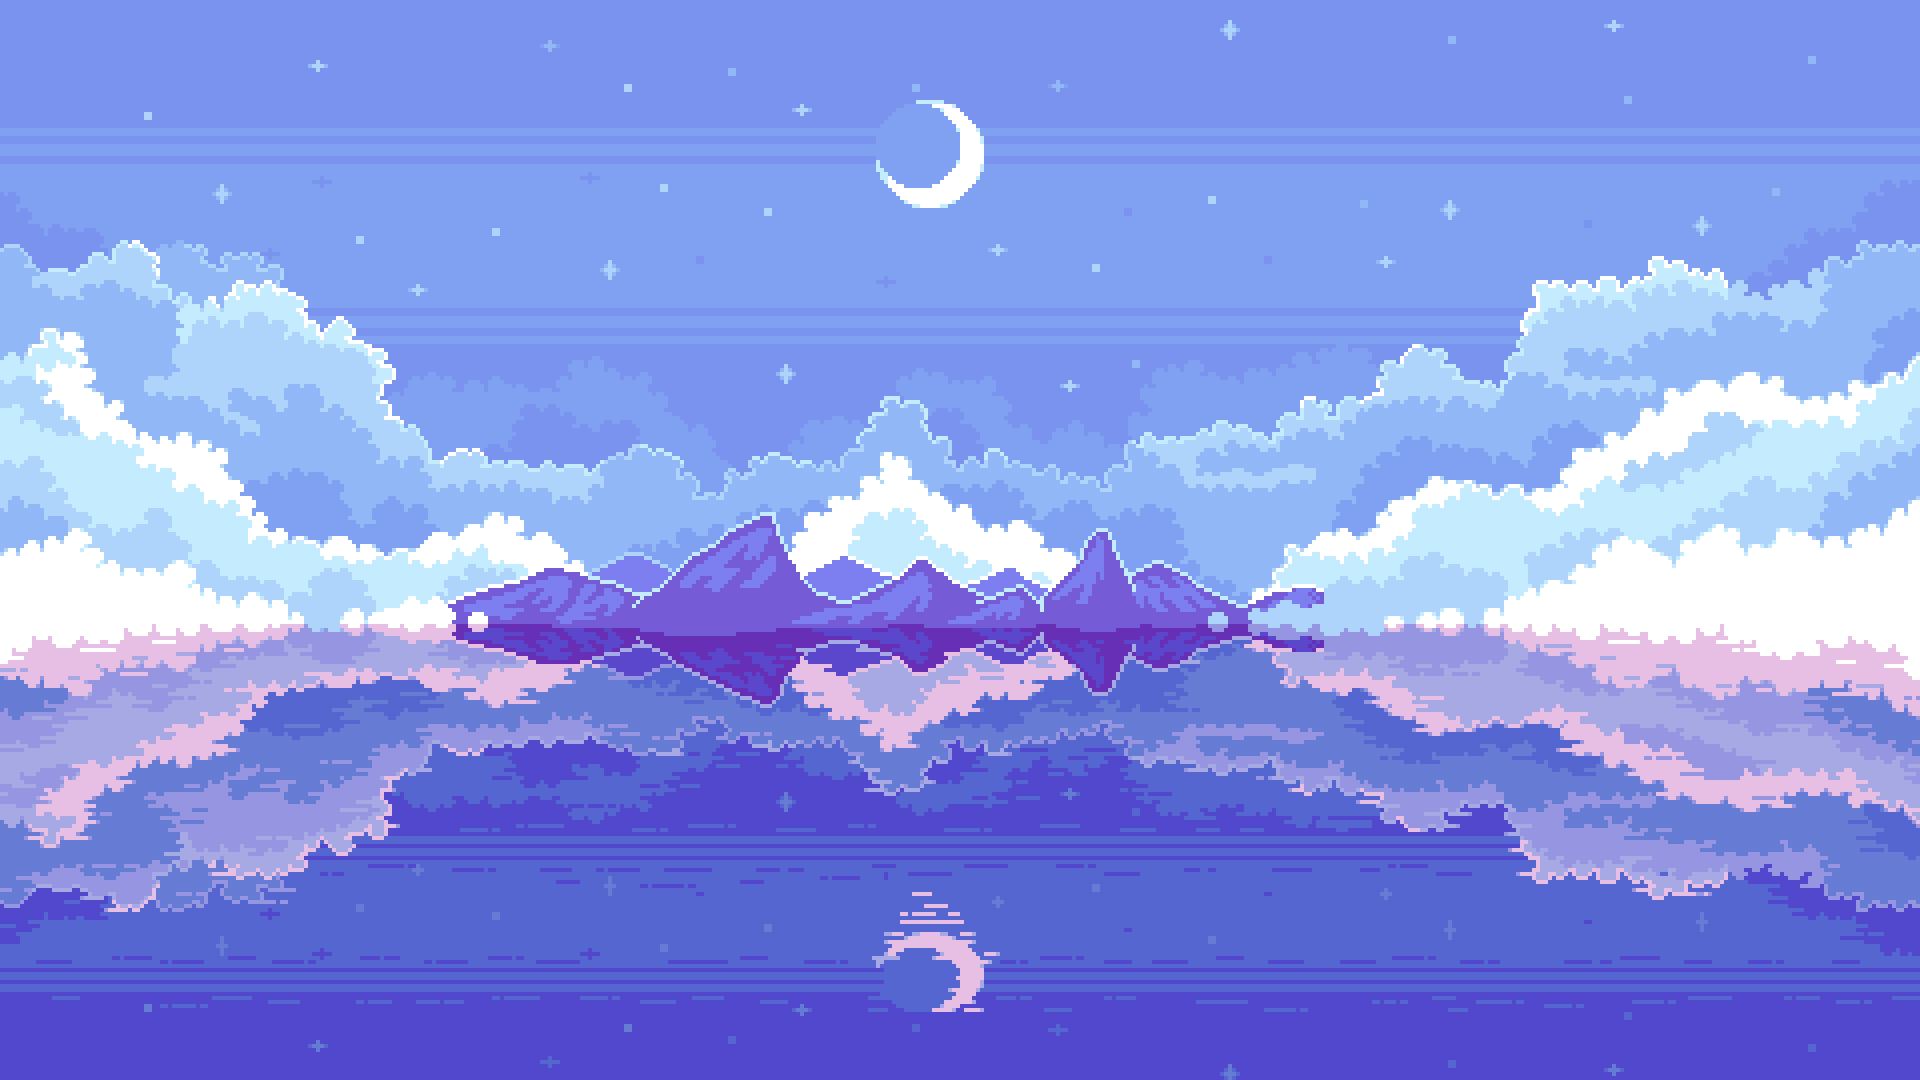 A pixelated image of the moon and clouds - Pixel art